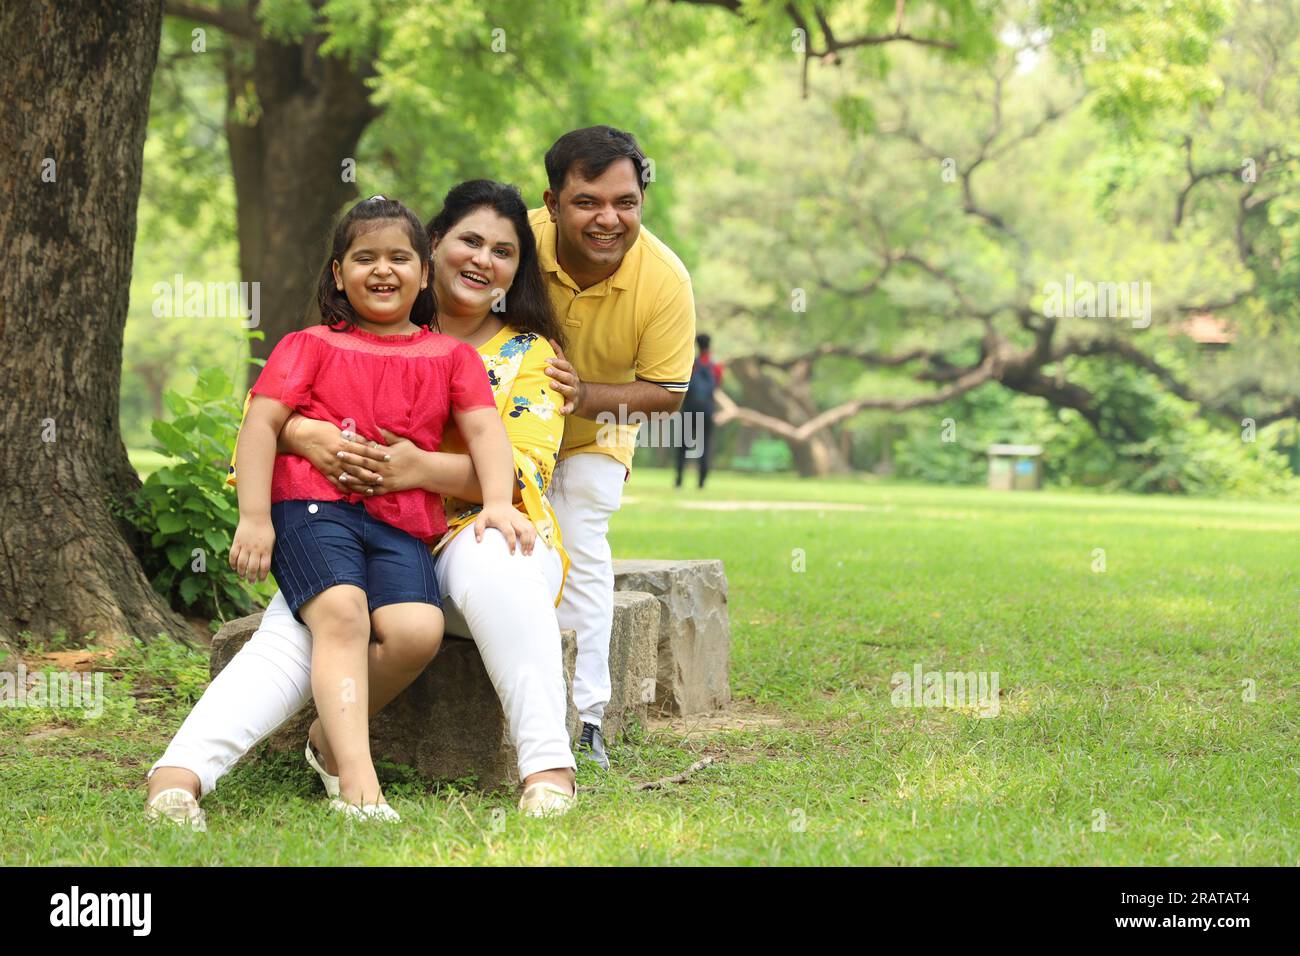 Happy Indian family with a girl child sitting together on grass and enjoying their family time early morning. The family is looking at the camera. Stock Photo